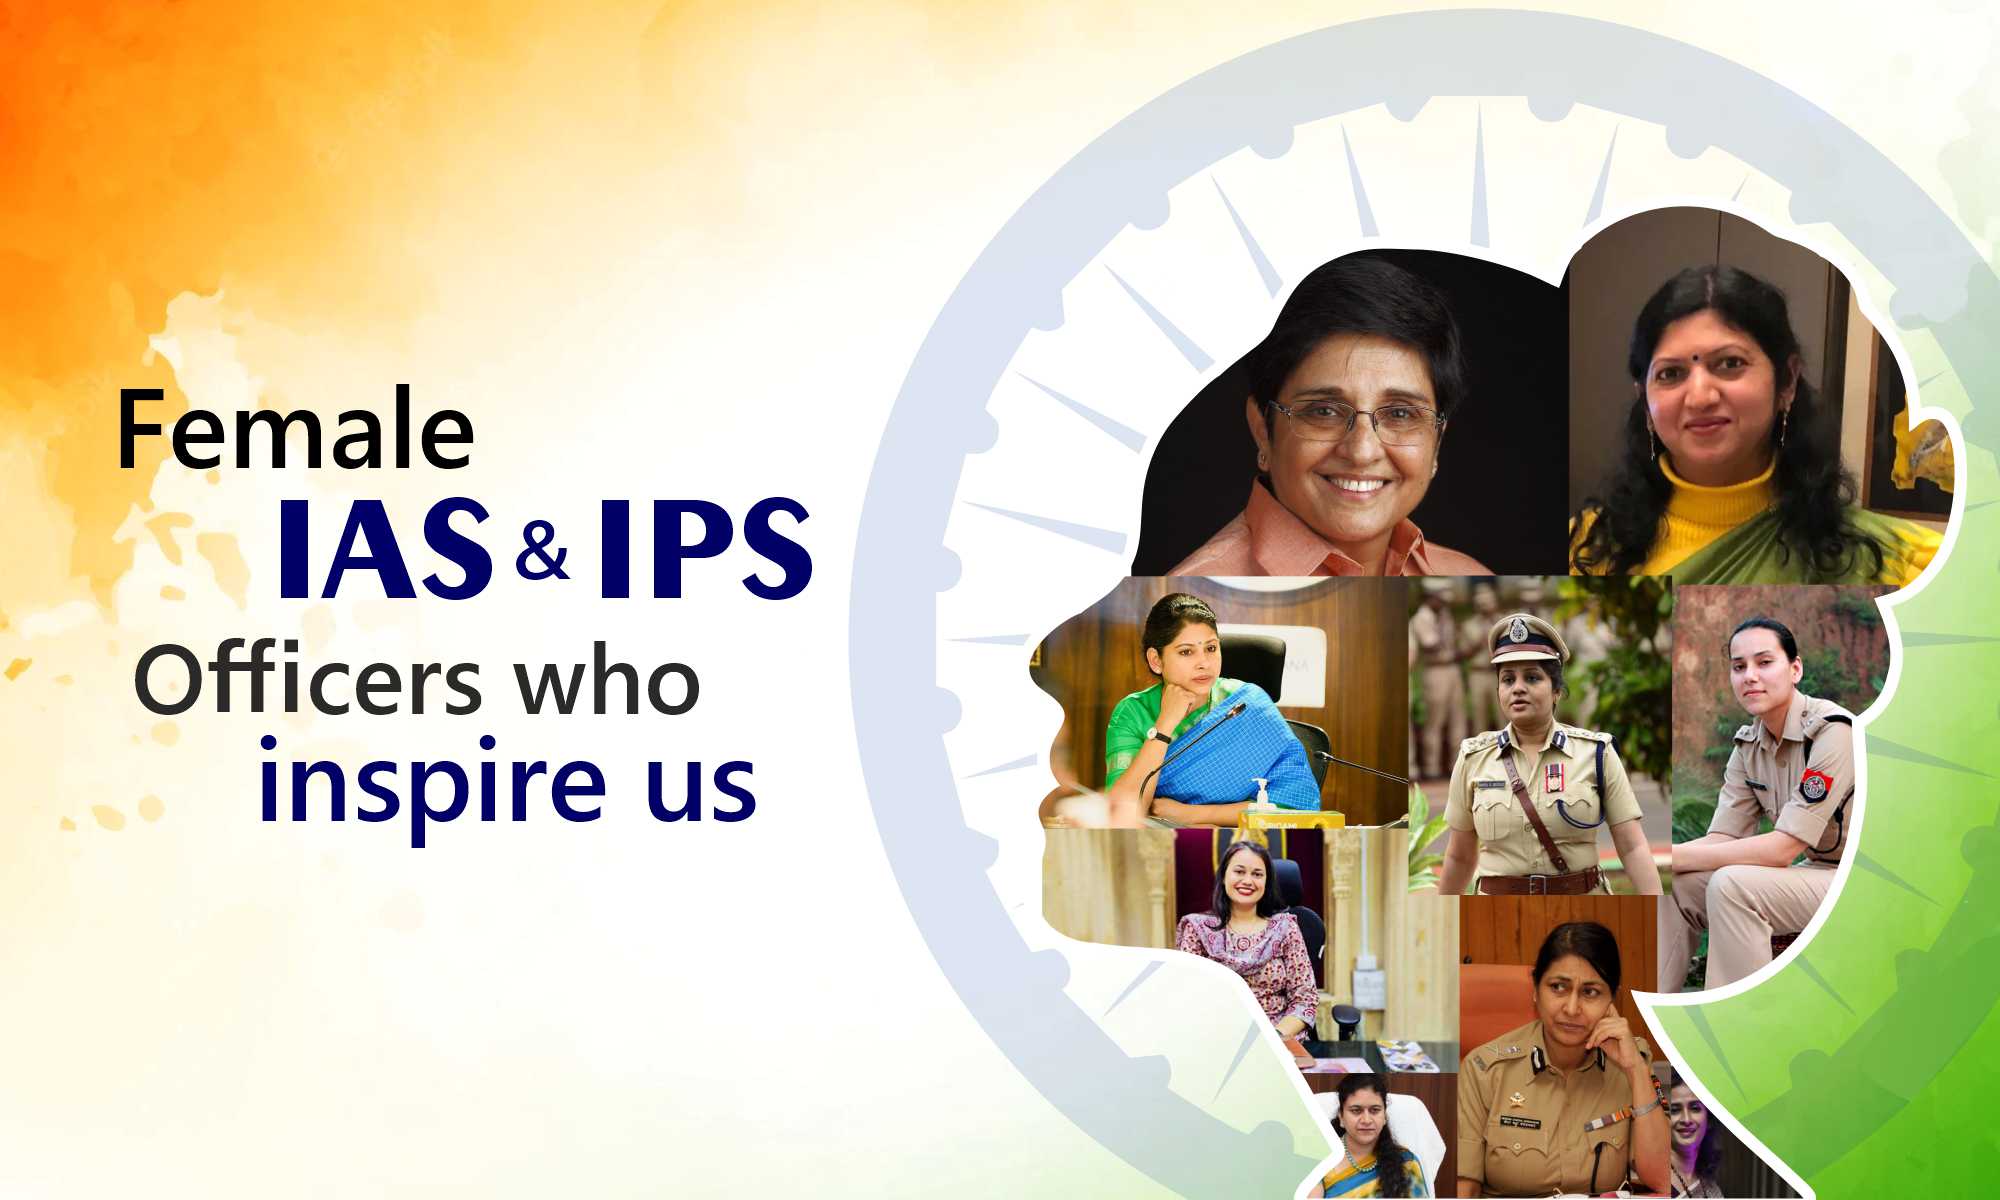 FEMALE IAS/IPS OFFICERS WHO INSPIRE US